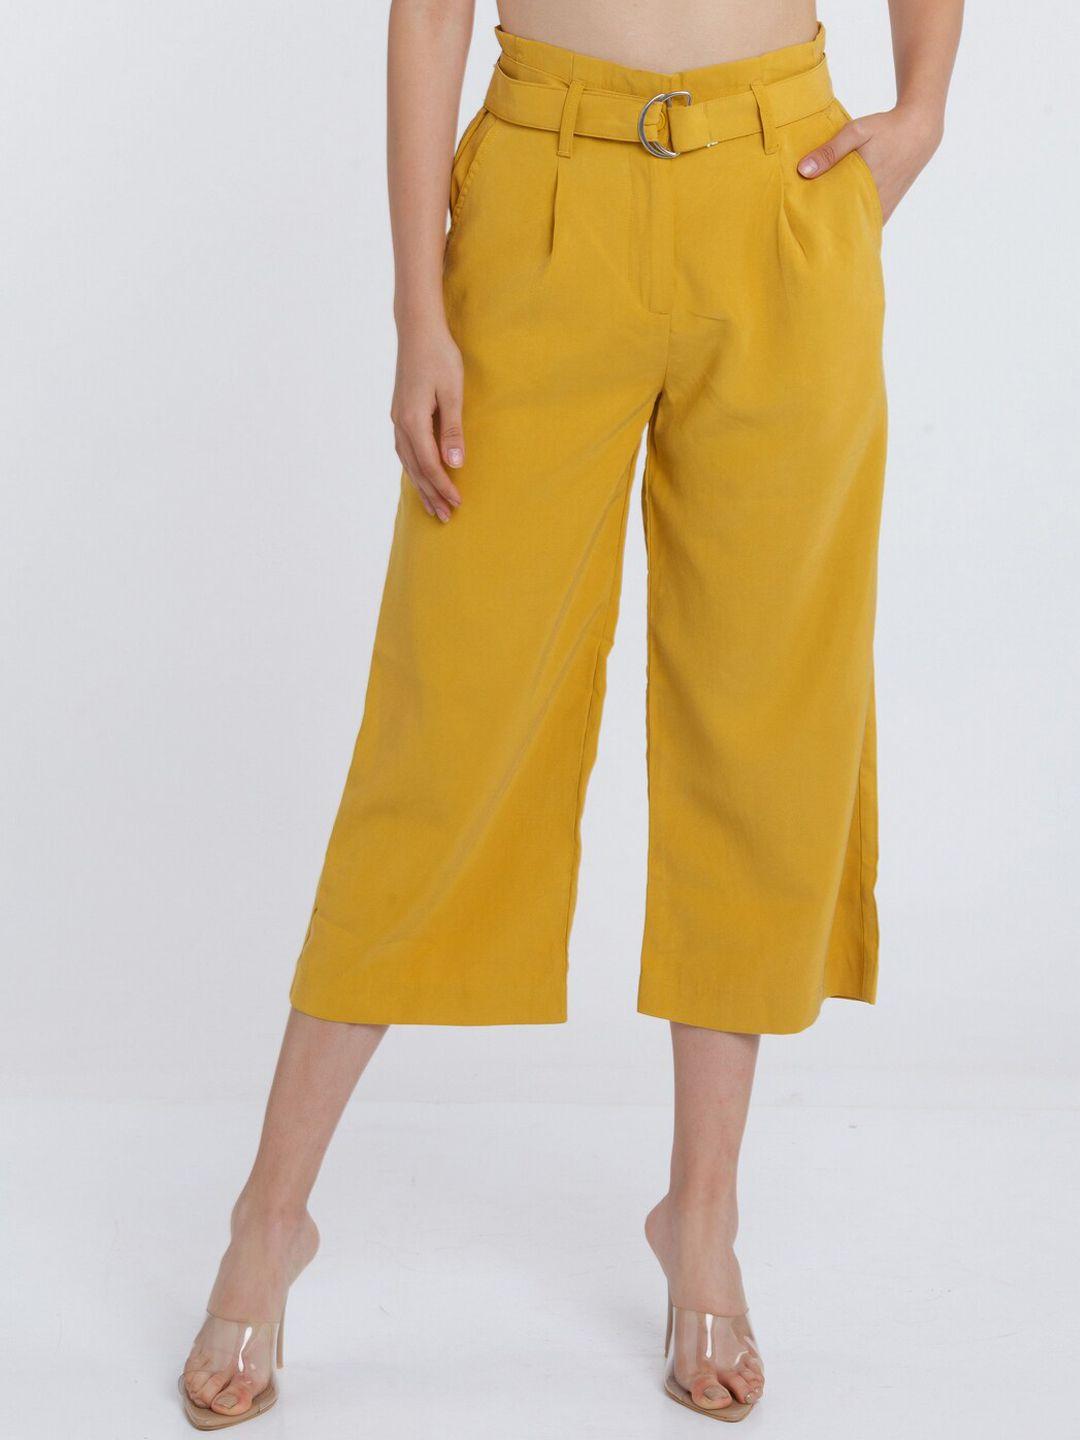 zink london women yellow flared high-rise culottes trousers